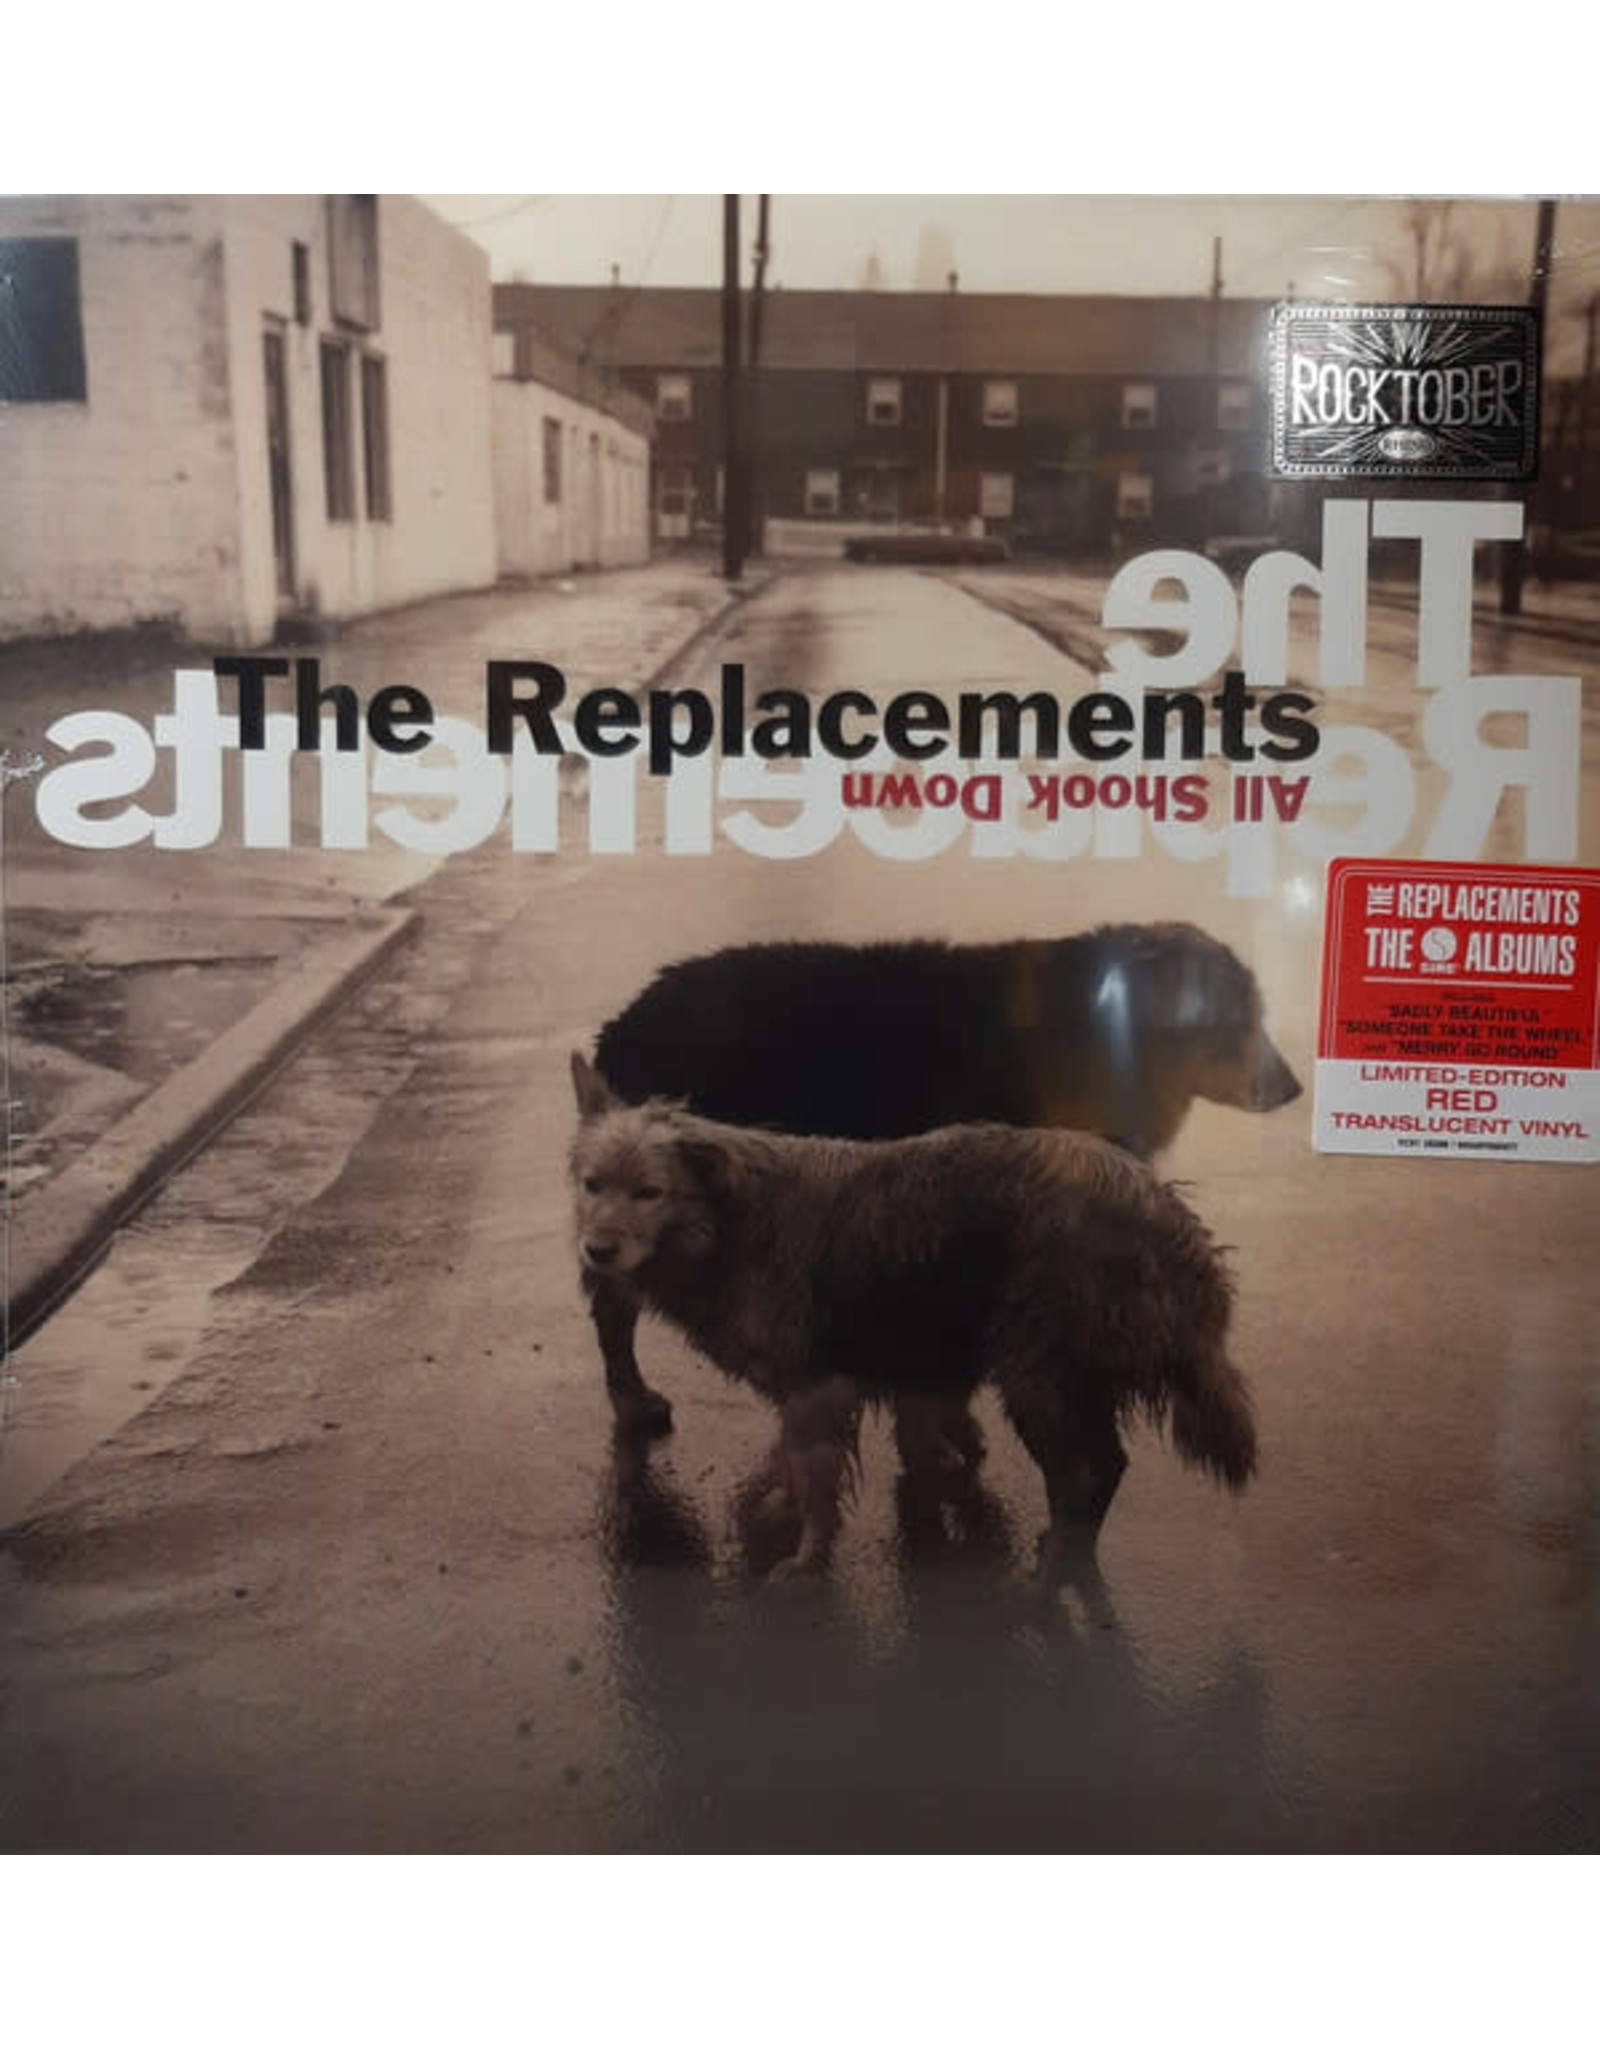 Replacements, The - All Shook Down LP